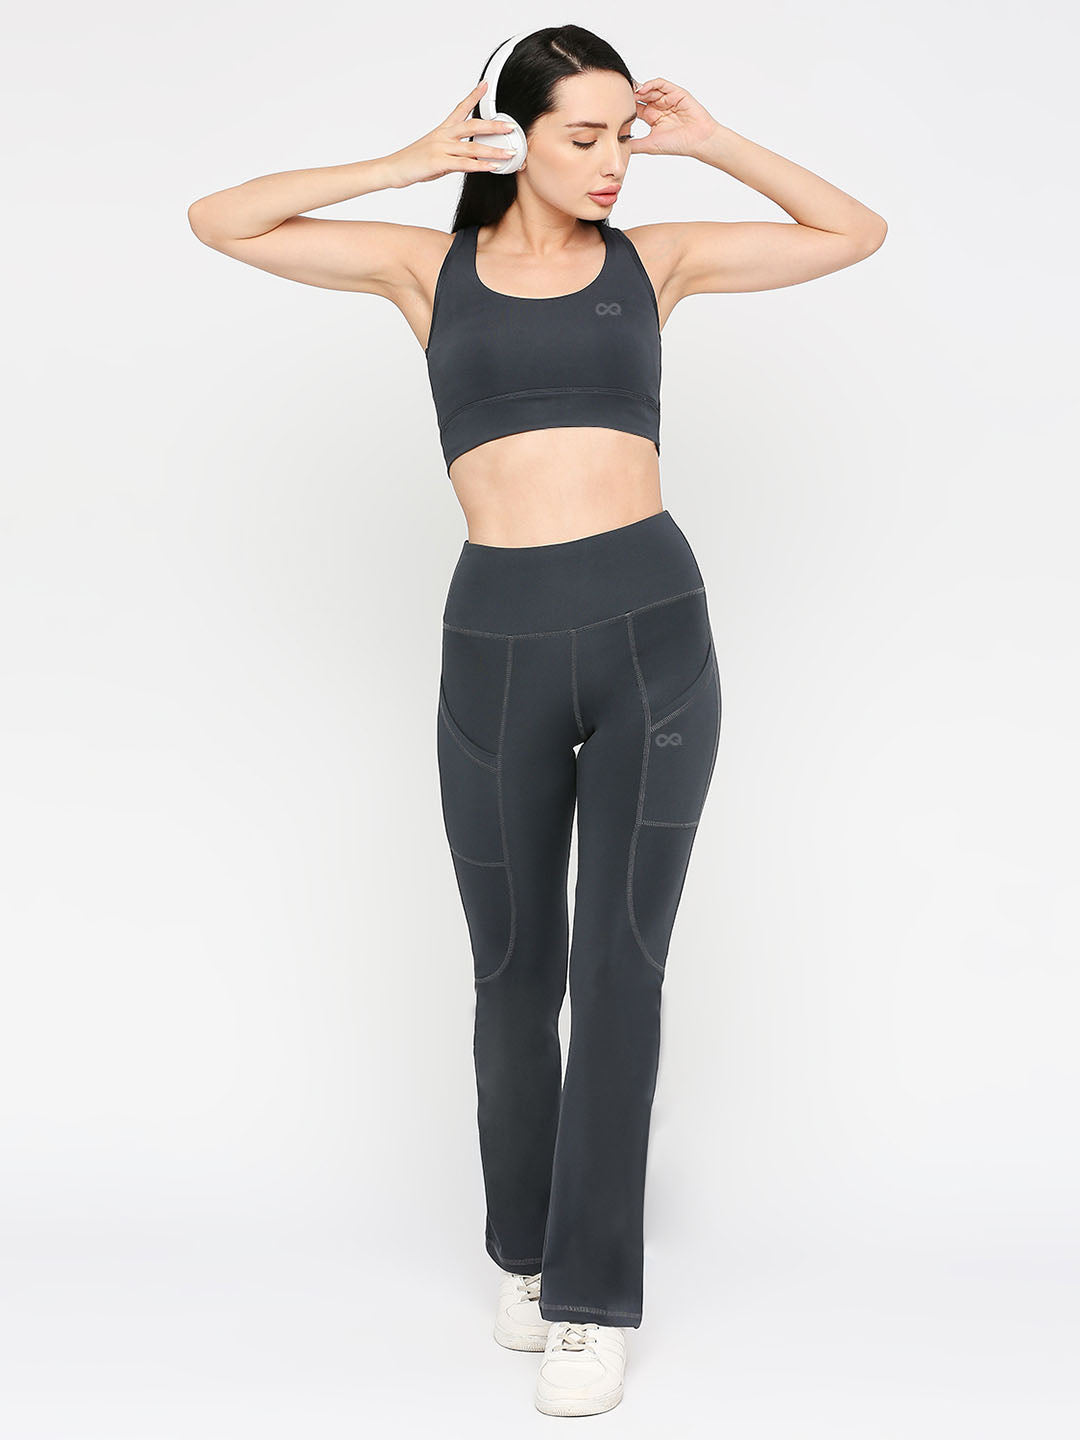 Women's Black Flared Sports Leggings - Stay Comfortable and Stylish